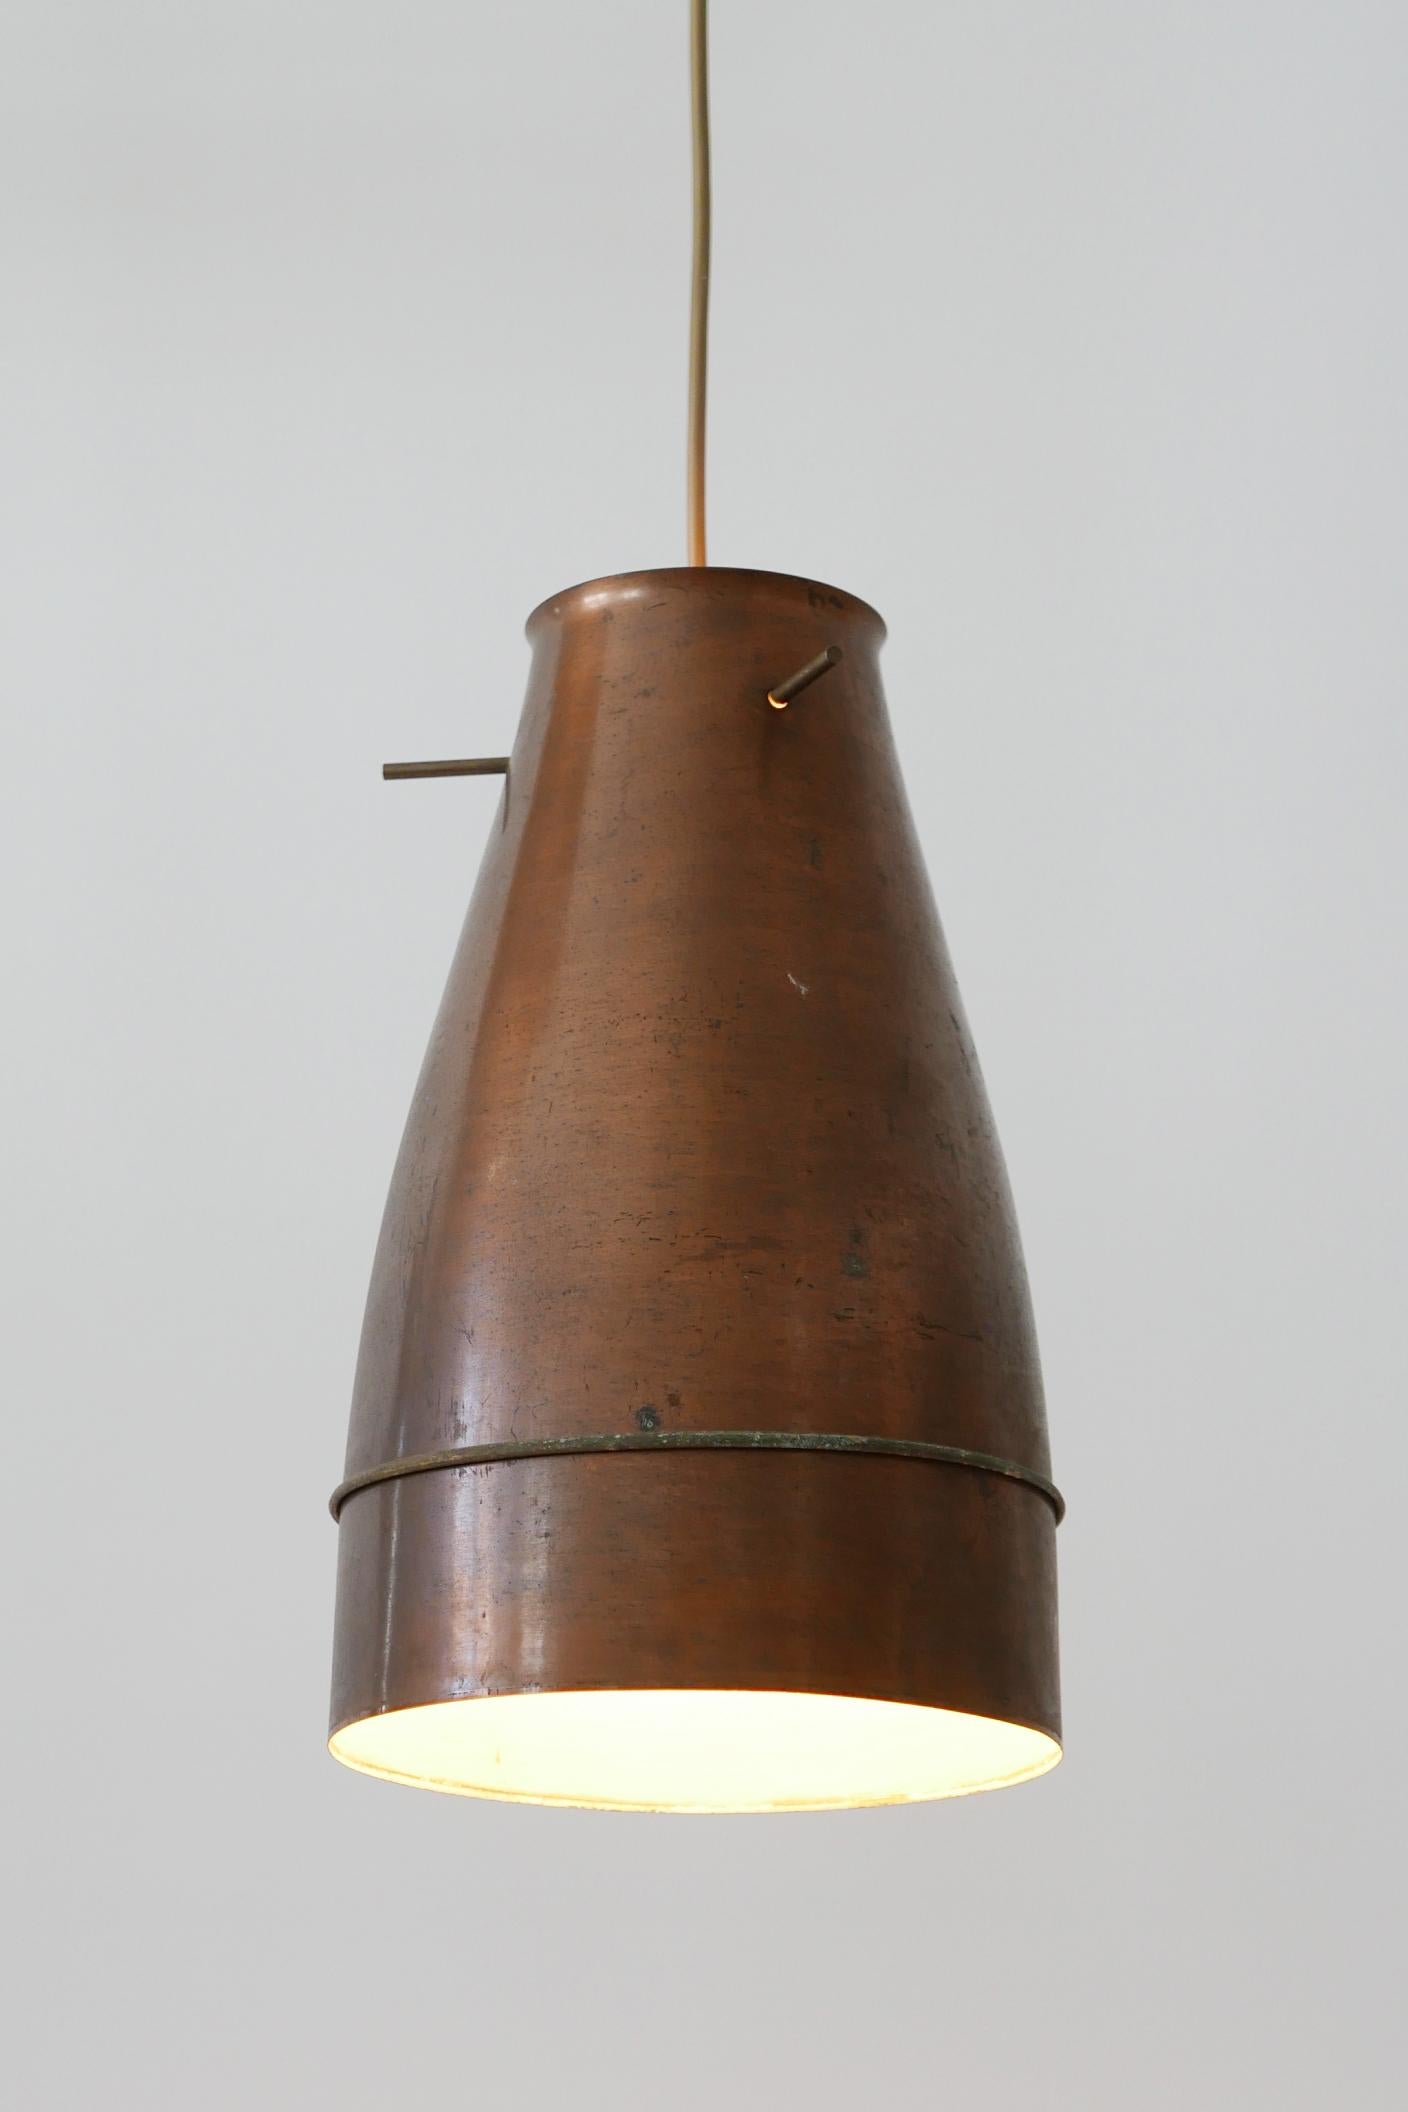 Elegant Mid-Century Modern brass pendant lamp or hanging light. Designed & manufactured in Germany, 1950s.

Executed in copper sheet, it comes with 1 x E27 Edison screw fit bulb holder, is rewired and in working condition. It runs both on 110/230